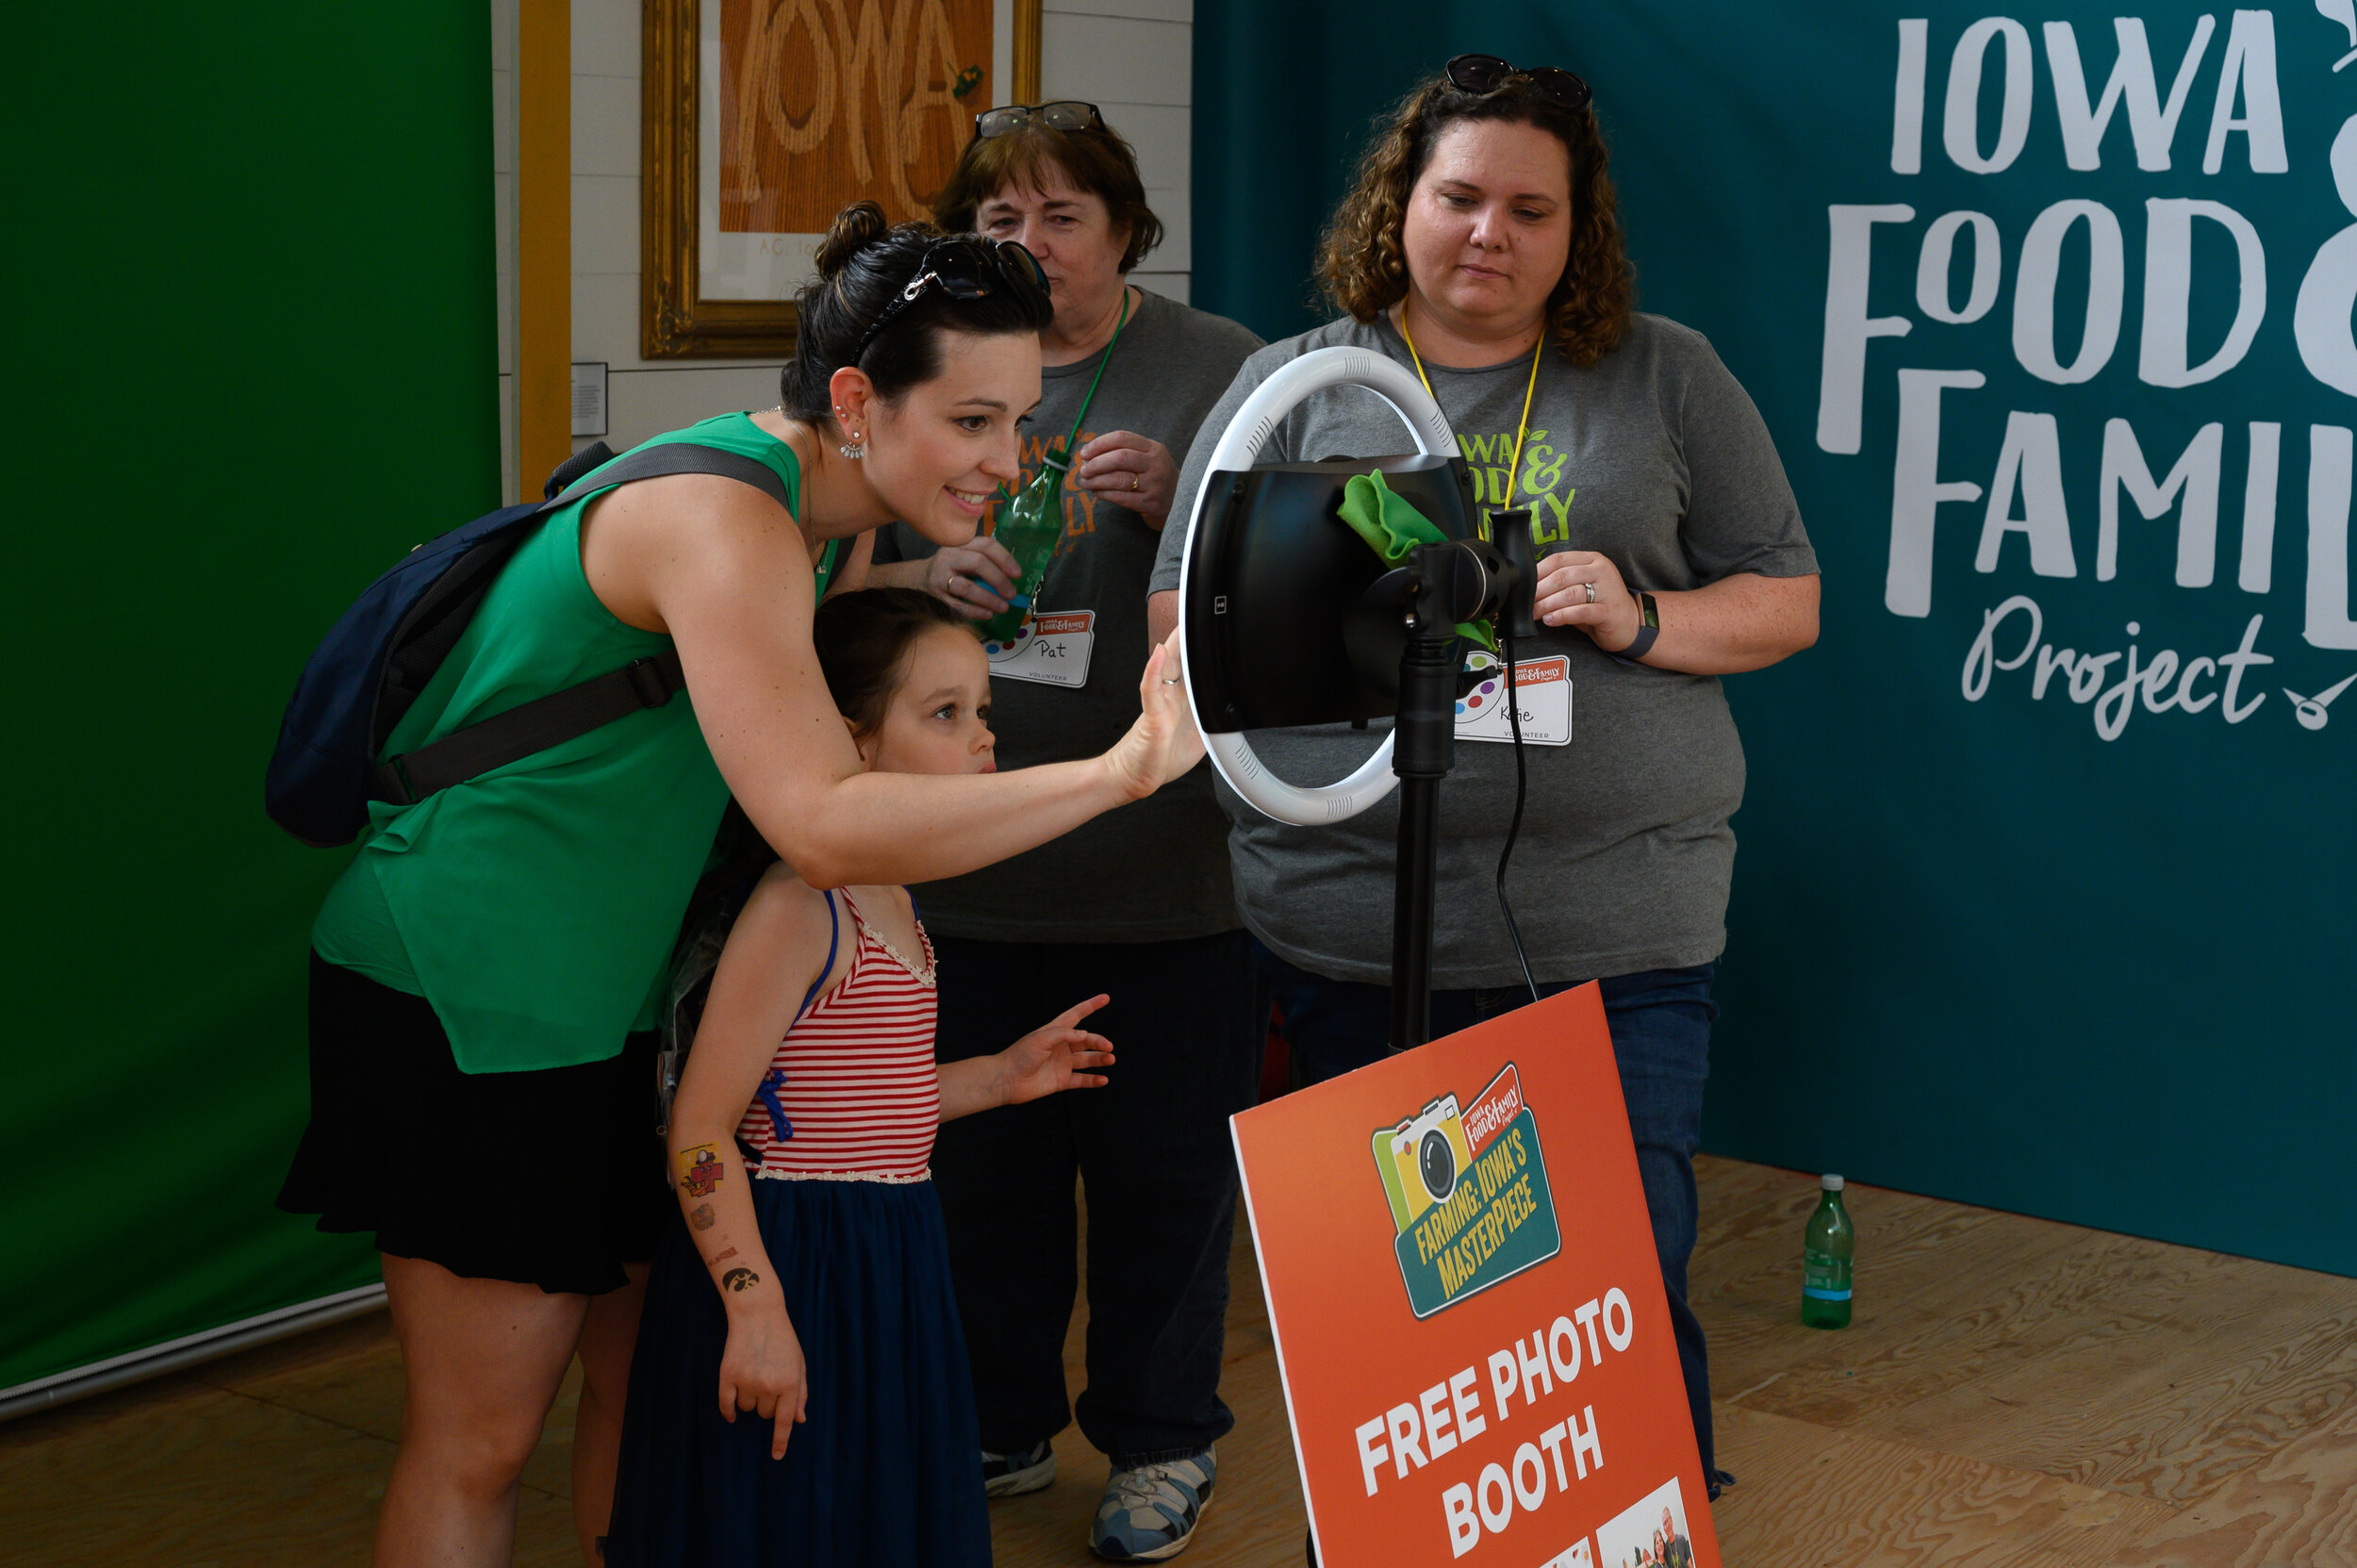 The 2019 fair display included a green screen photo booth for fairgoers to “picture” themselves in fun farm scenes.